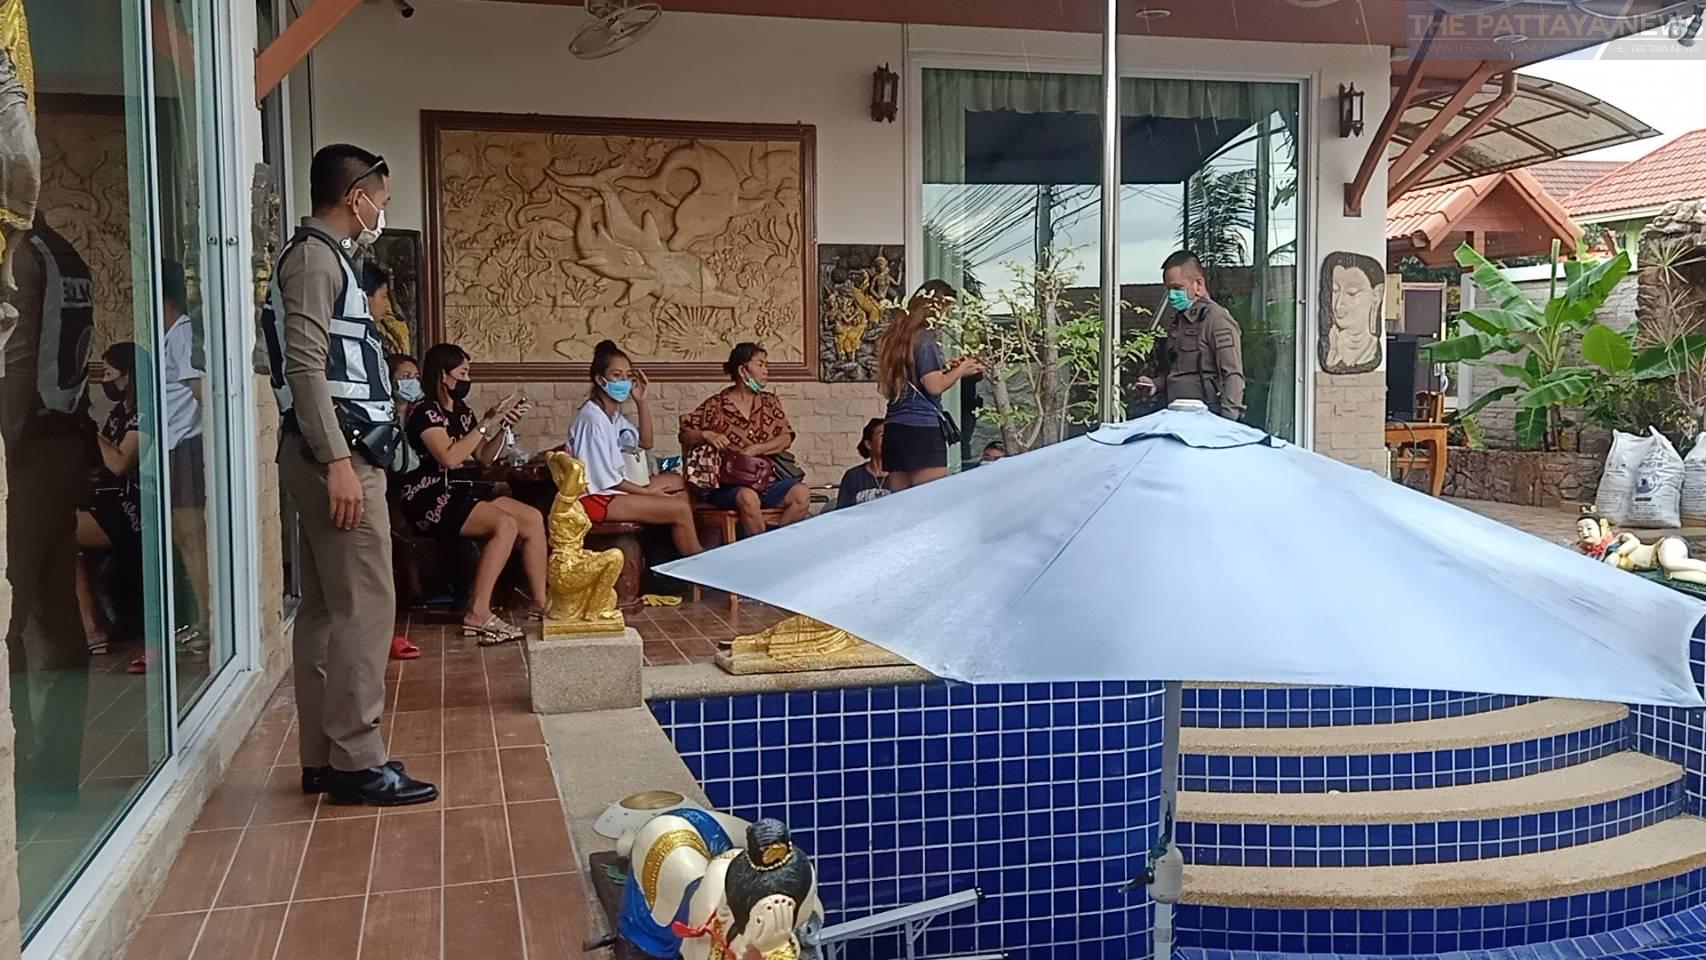 51-year-old woman falls to death in empty swimming pool in Pattaya